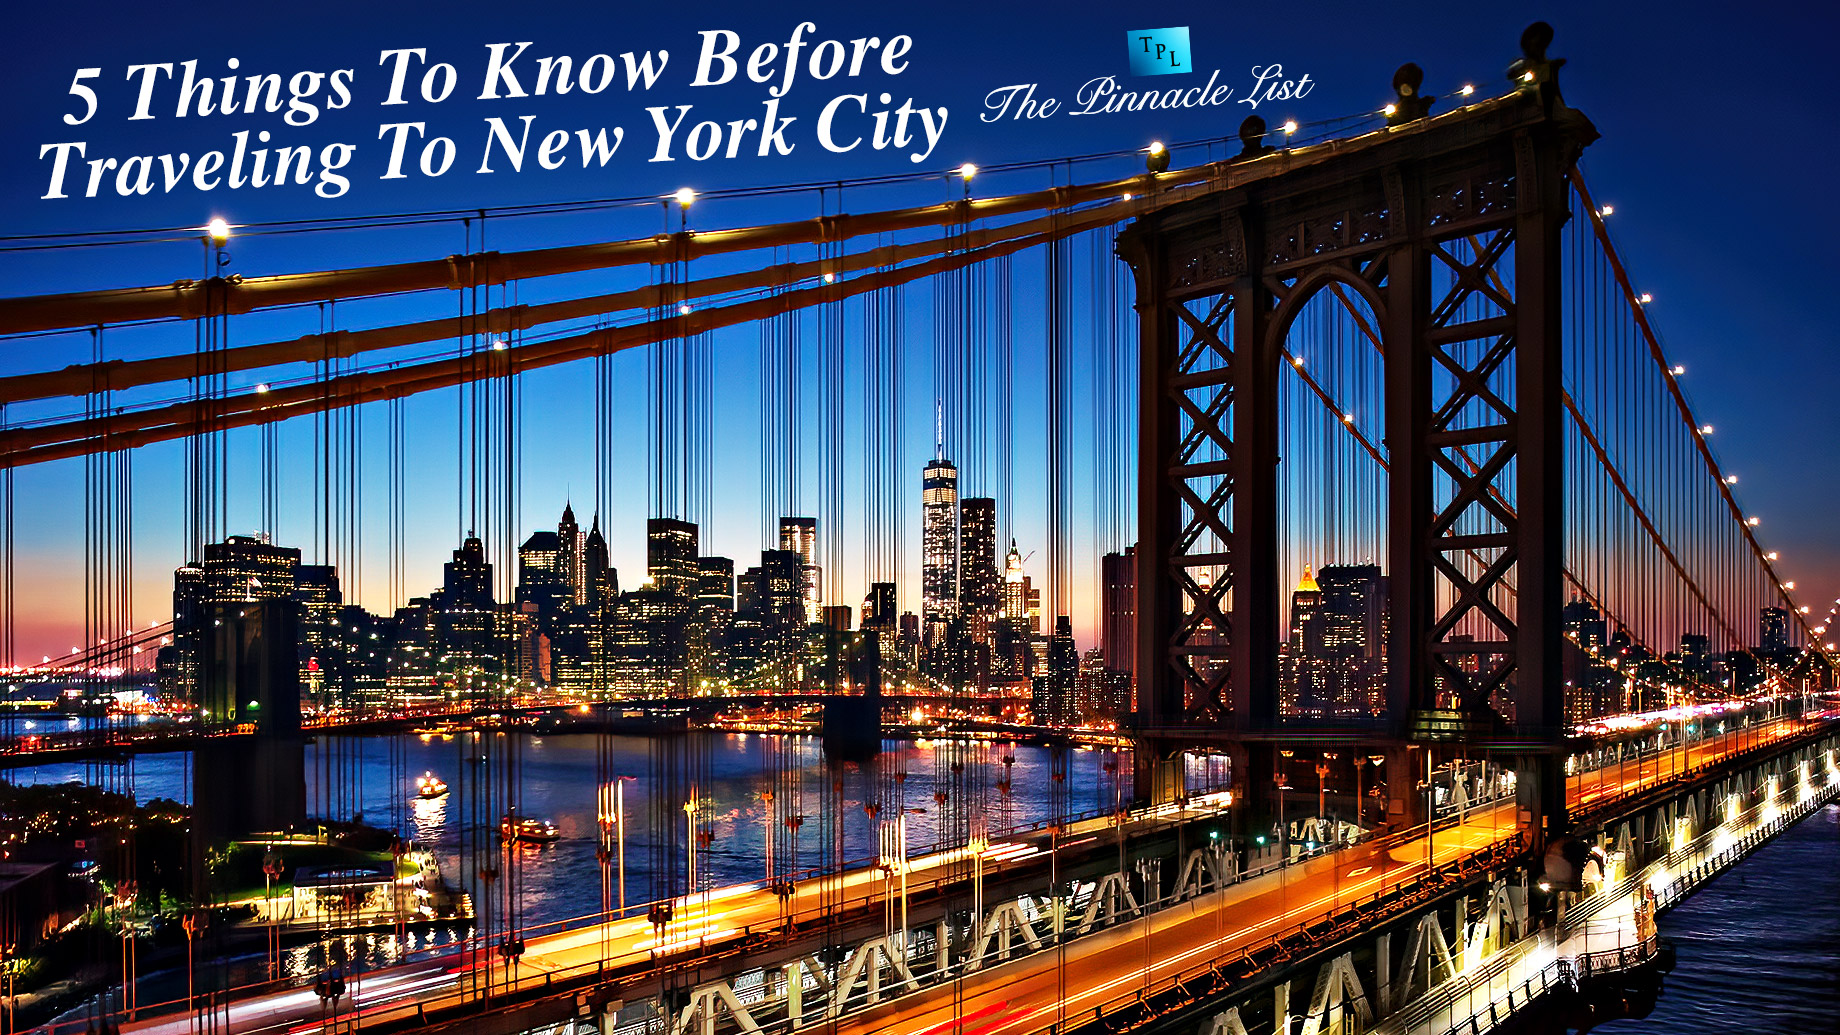 5 Things To Know Before Traveling To New York City